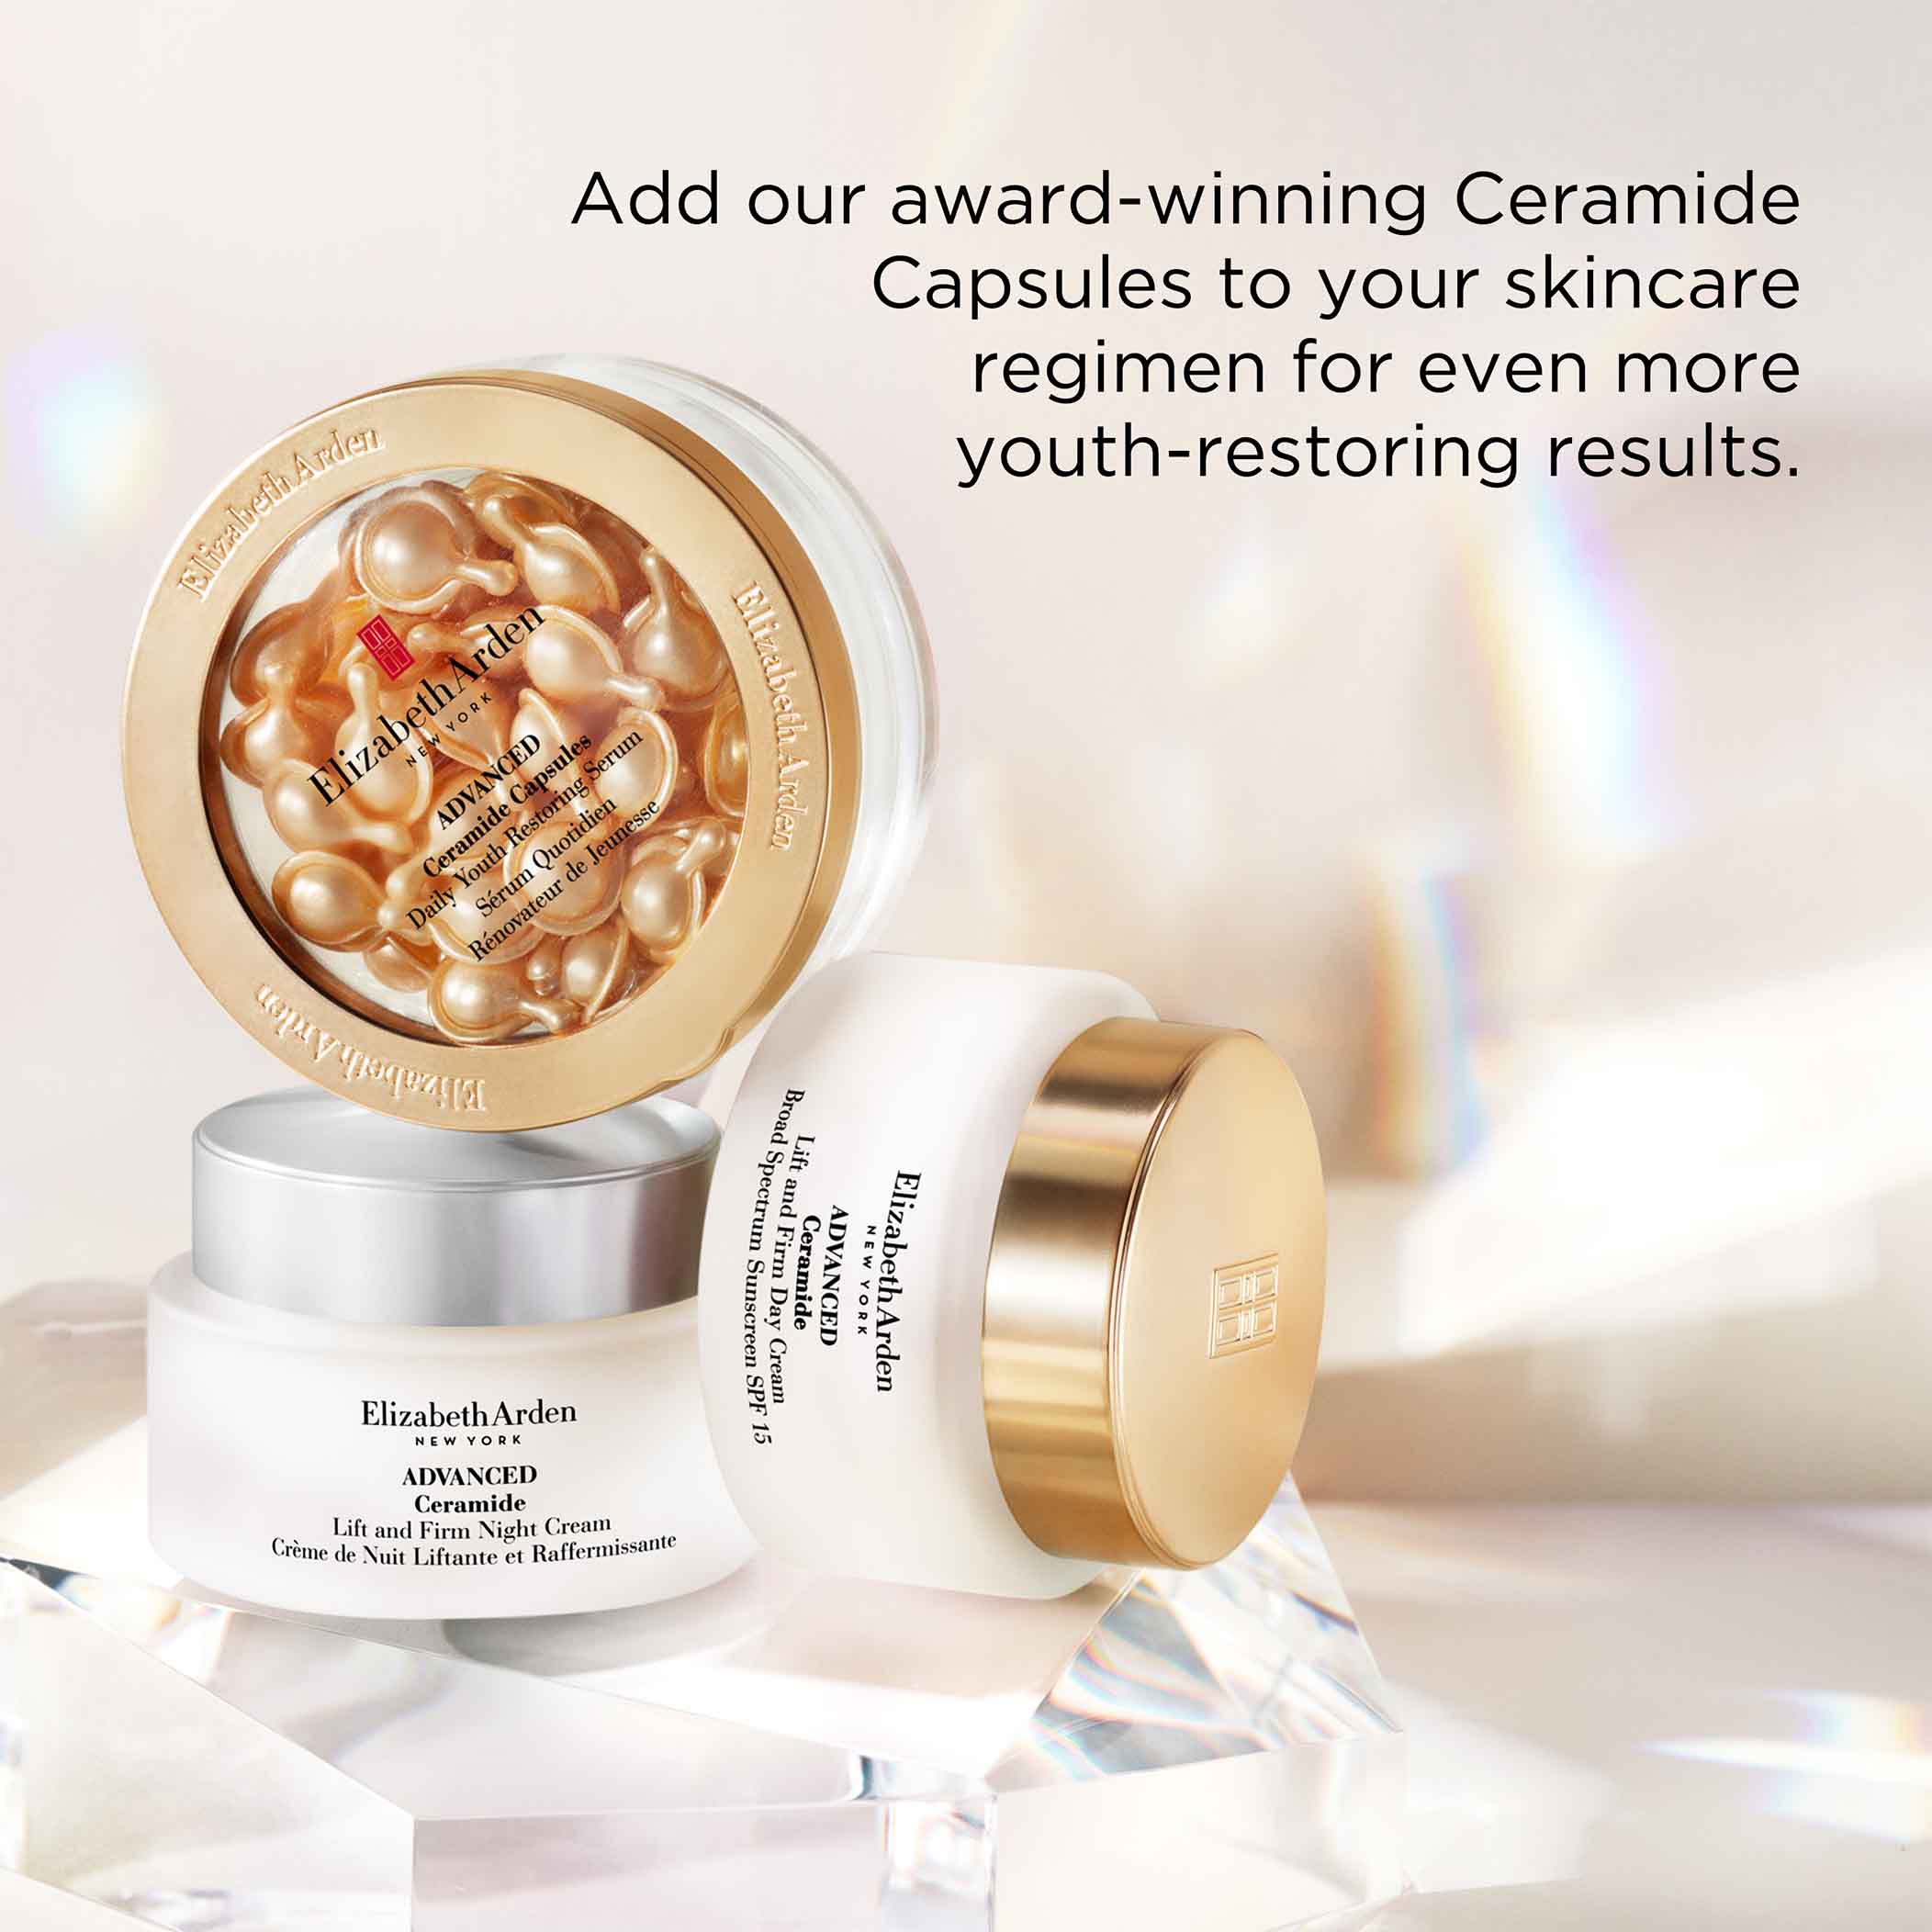 Add our award-winning Ceramide Capsules to your skincare regimen for even more youth-restoring results